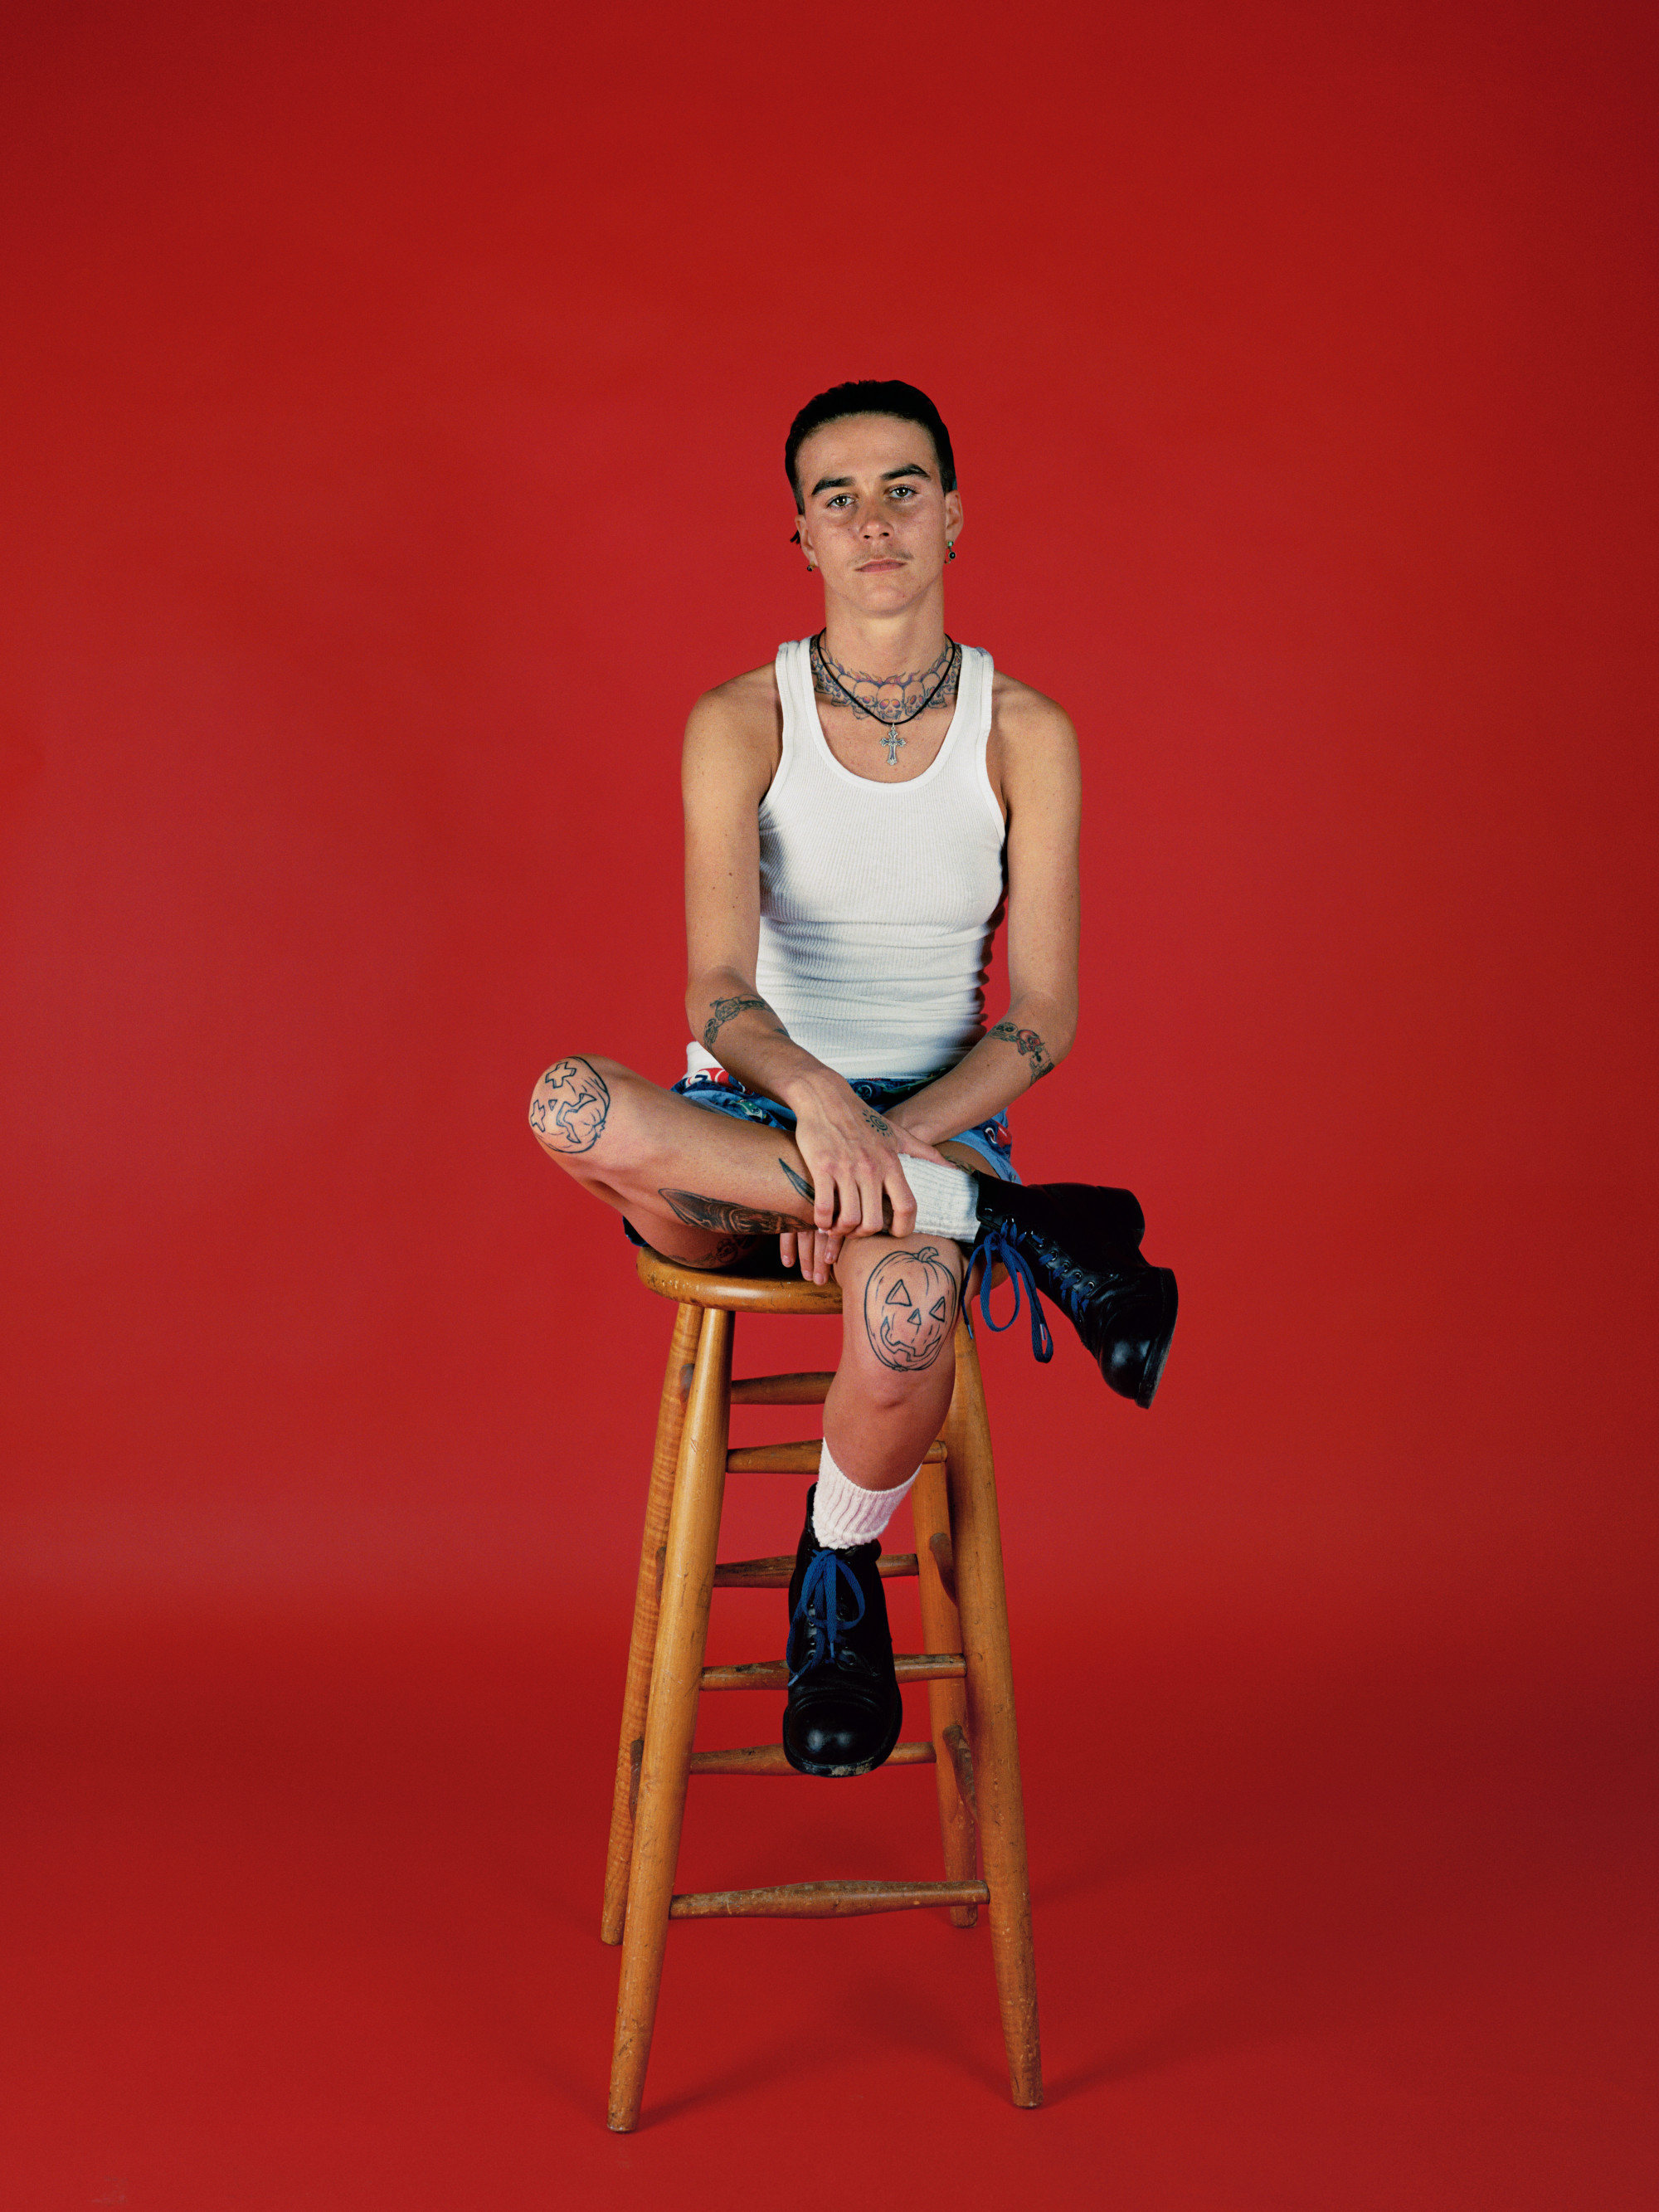 Pig Pen, 1993. Chromogenic print, 20 × 16 in. (50.8 × 40.6 cm). Courtesy the artist and Regen Projects, Los Angeles; Lehmann Maupin, New York/Hong Kong/Seoul/London; Thomas Dane Gallery, London and Naples; and Peder Lund, Oslo. Portraits (1993–97)